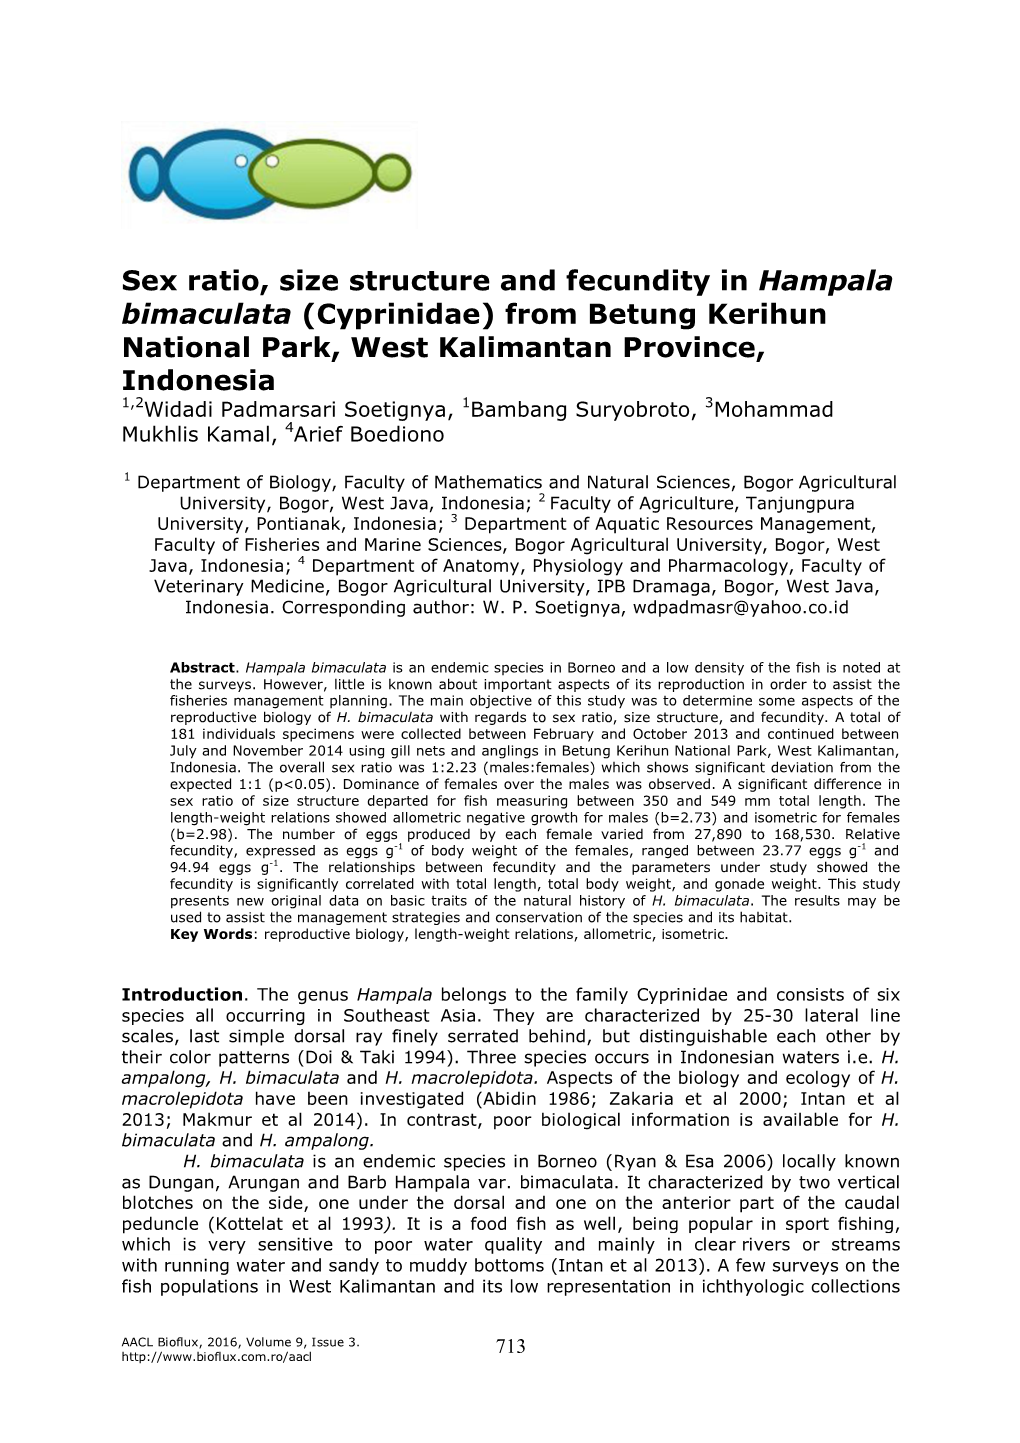 Sex Ratio, Size Structure and Fecundity in Hampala Bimaculata (Cyprinidae